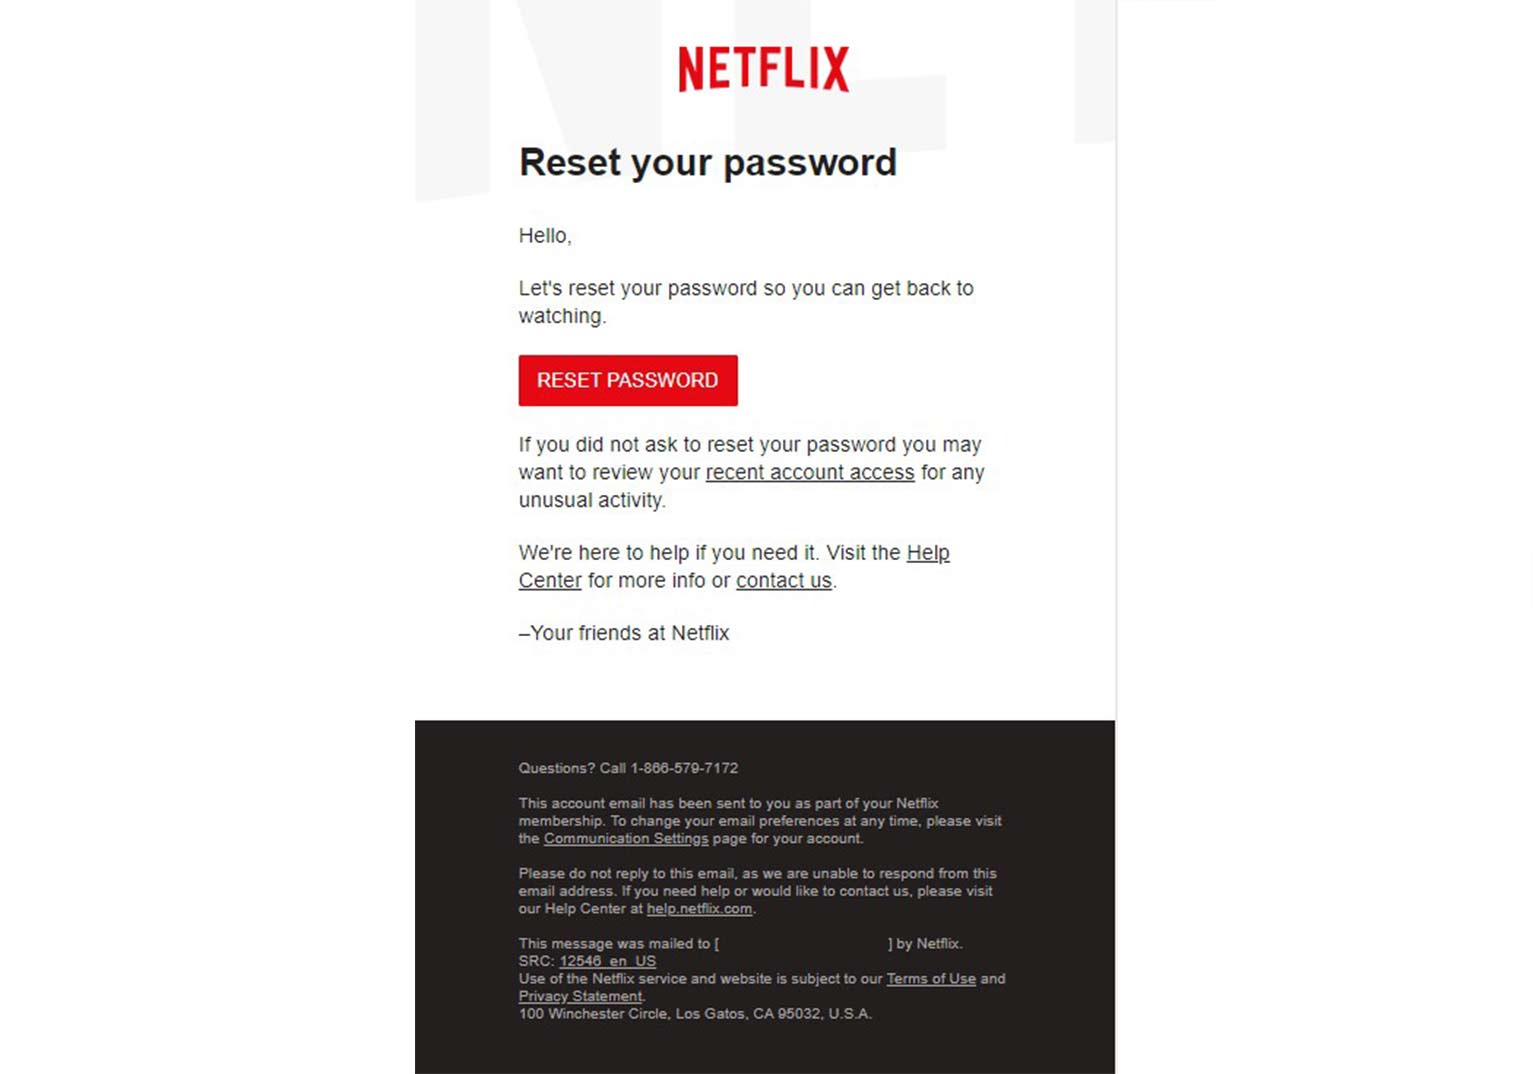 NetFlix "reset password" email with call to action button. Red NetFlix logo at the top amid a white background and black section at bottom.